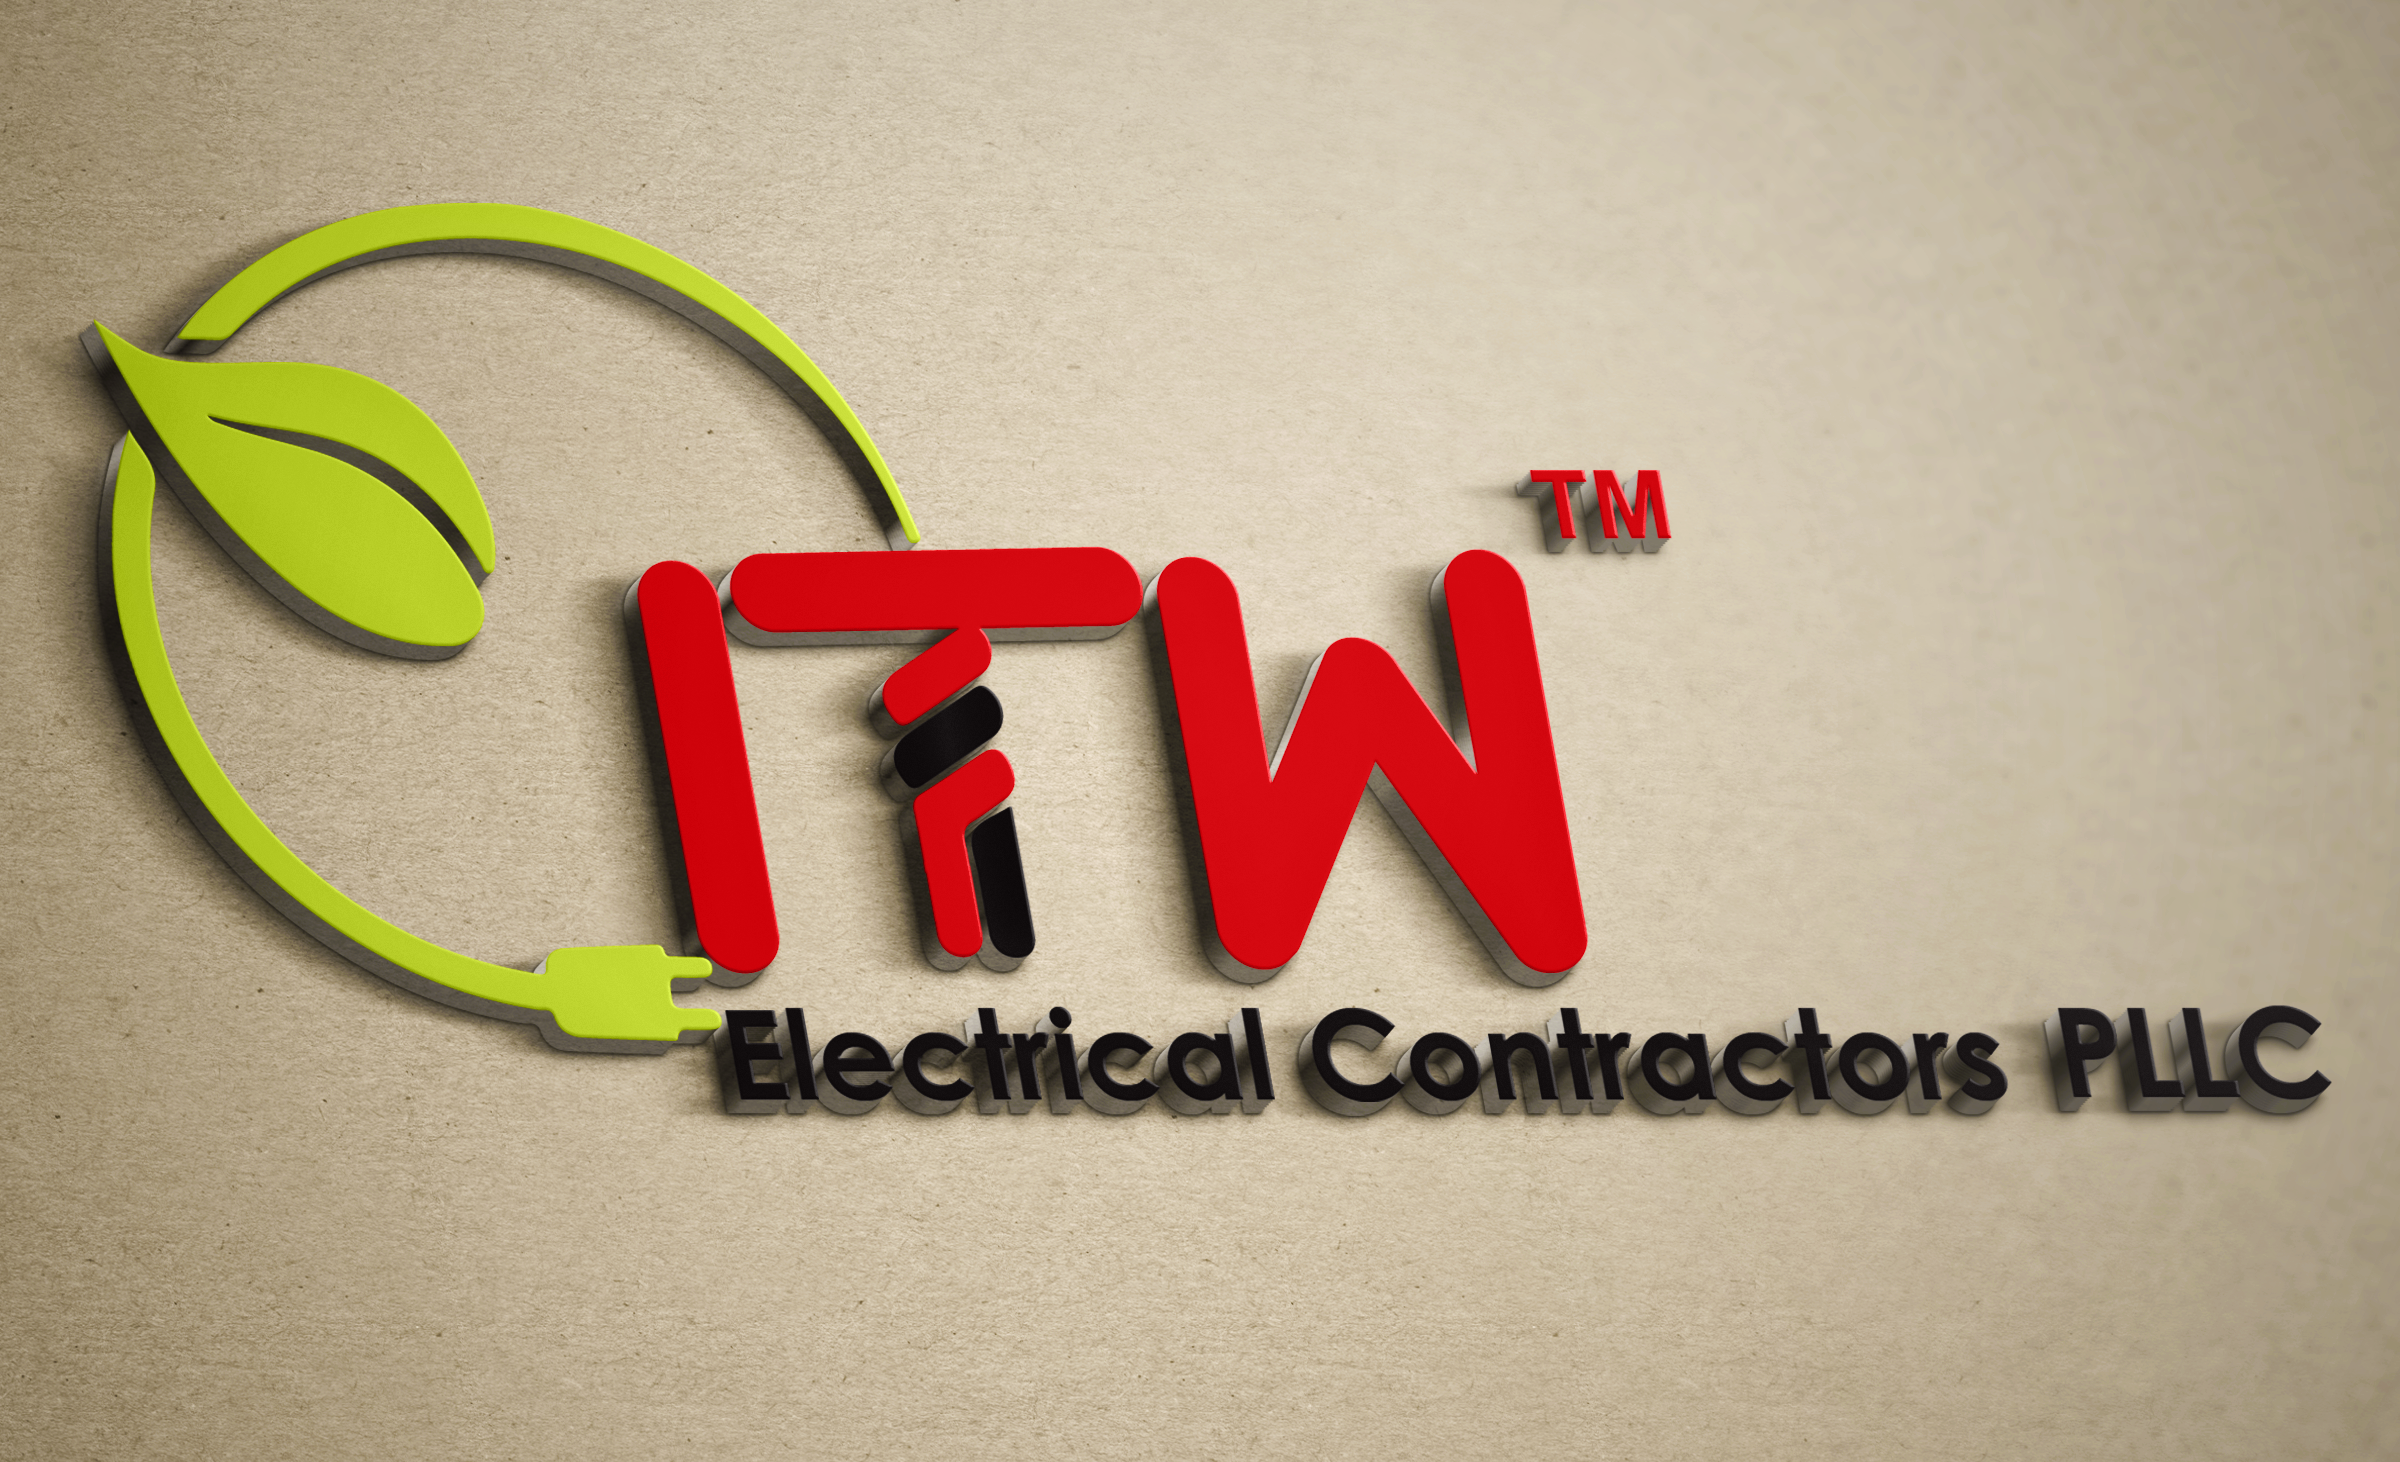 ITW Electrical Contractors, PLLC Logo